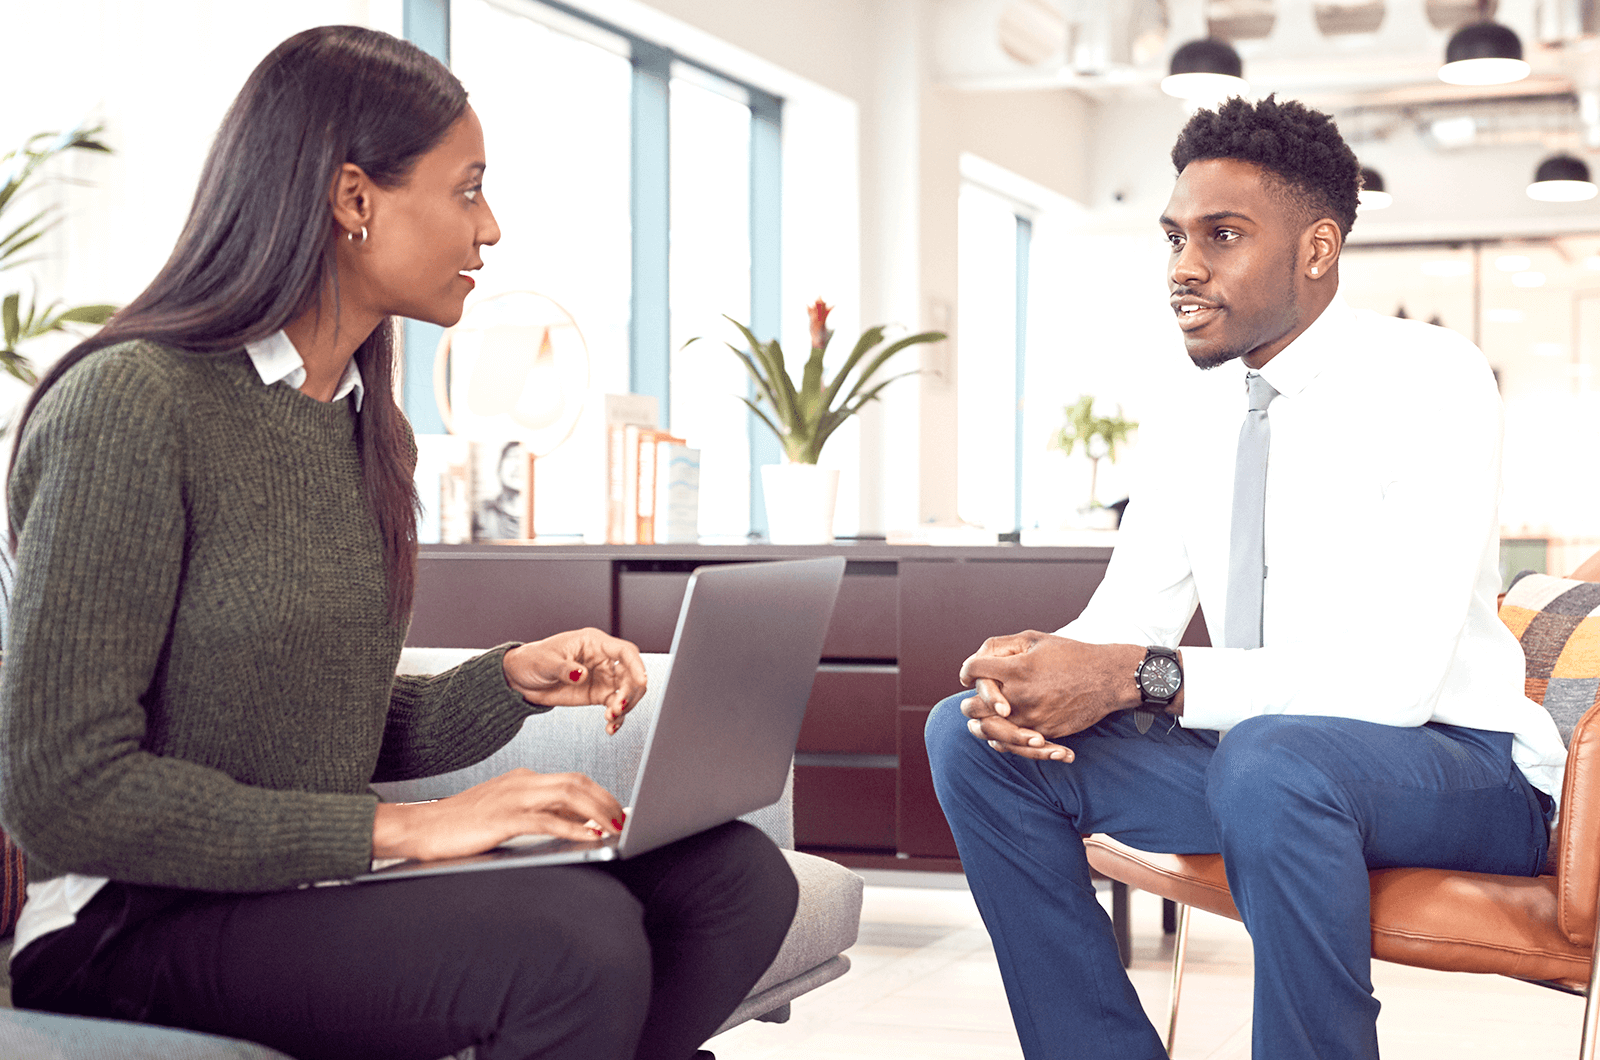 Man and woman sitting down talking during job interview